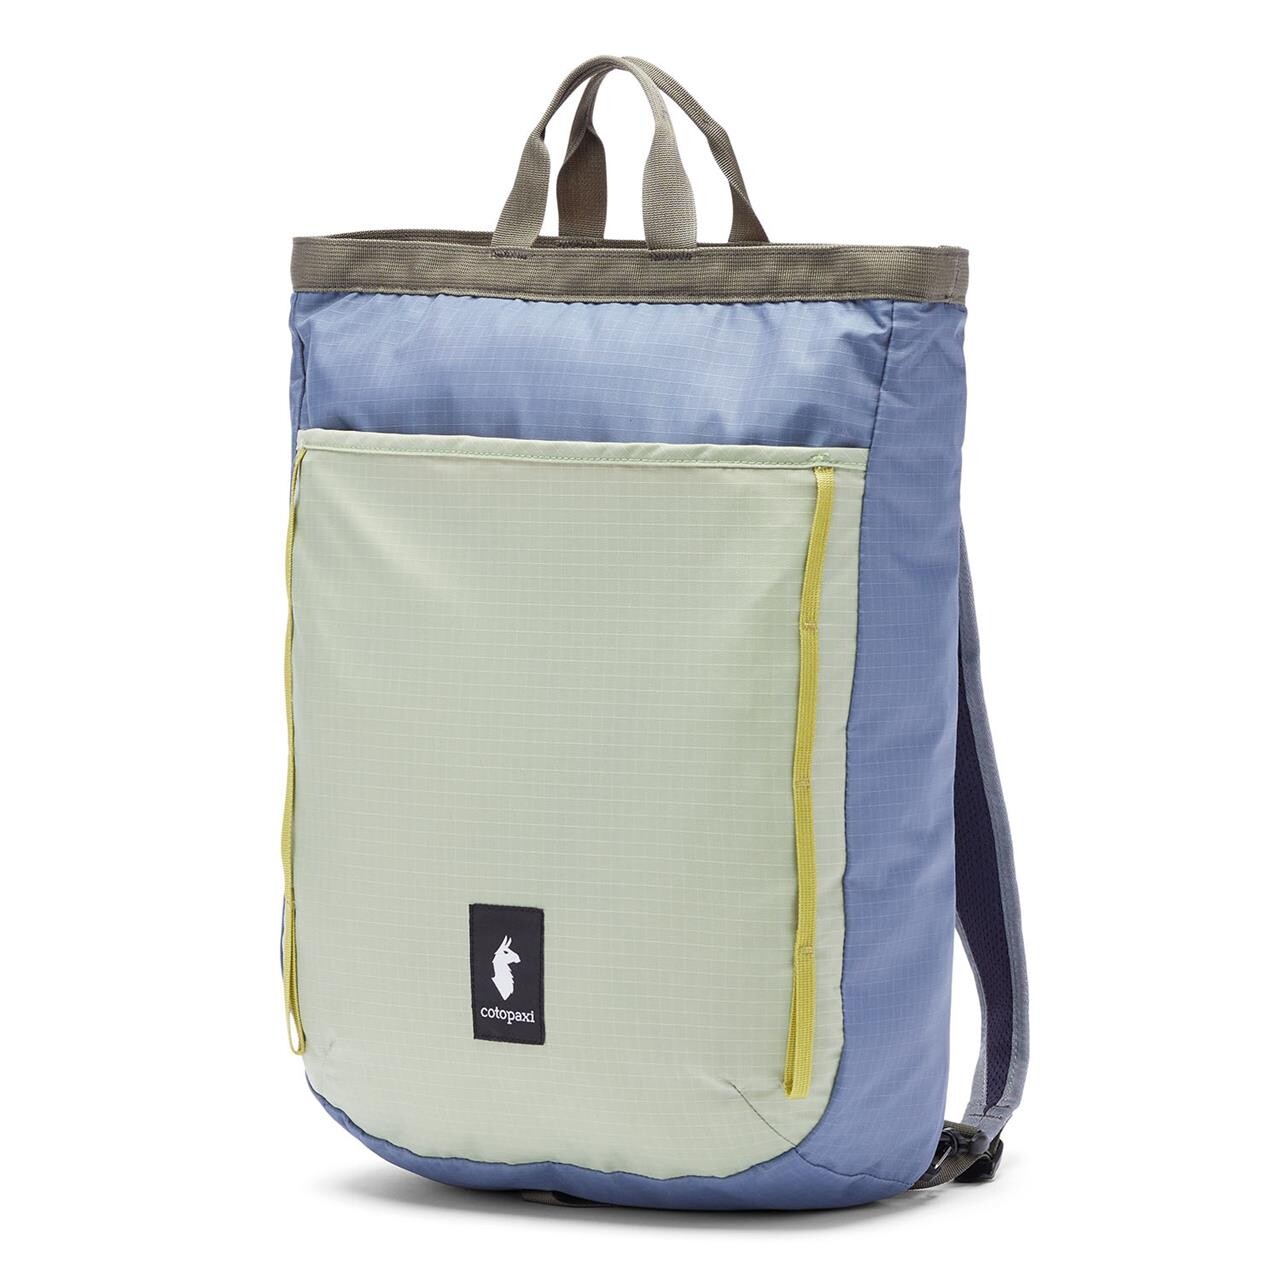 Se Cotopaxi Todo 16l Convertible Tote - Cada Dia (Grøn (GREEN TEA AND TEMPEST) ONE SIZE) hos Friluftsland.dk